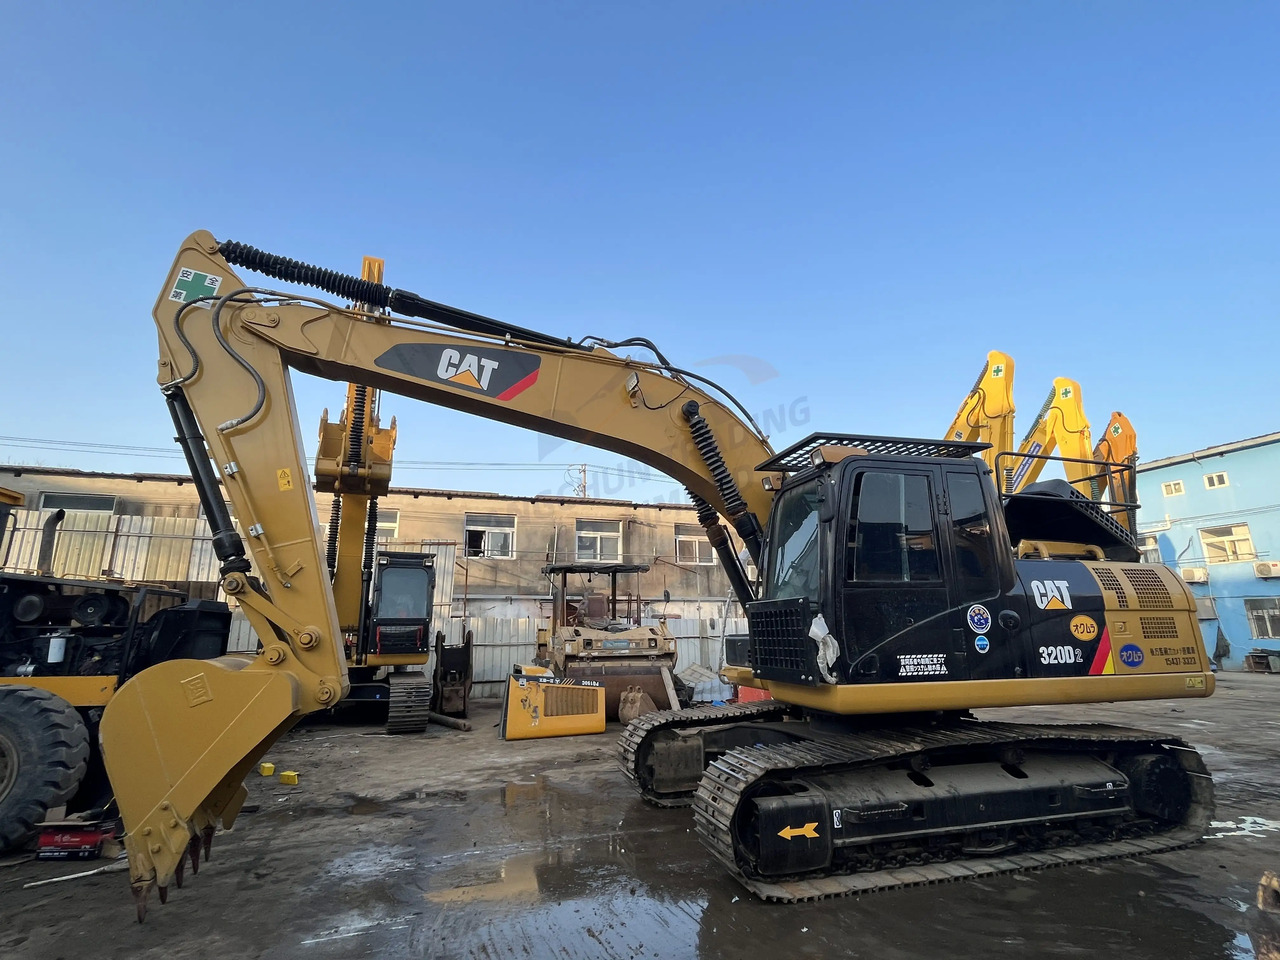 Leasing  2019 Year Original Used Good Price Excavator Caterpillar 320d2,Cat 320d With Operating Weight 20ton 2019 Year Original Used Good Price Excavator Caterpillar 320d2,Cat 320d With Operating Weight 20ton: φωτογραφία 4